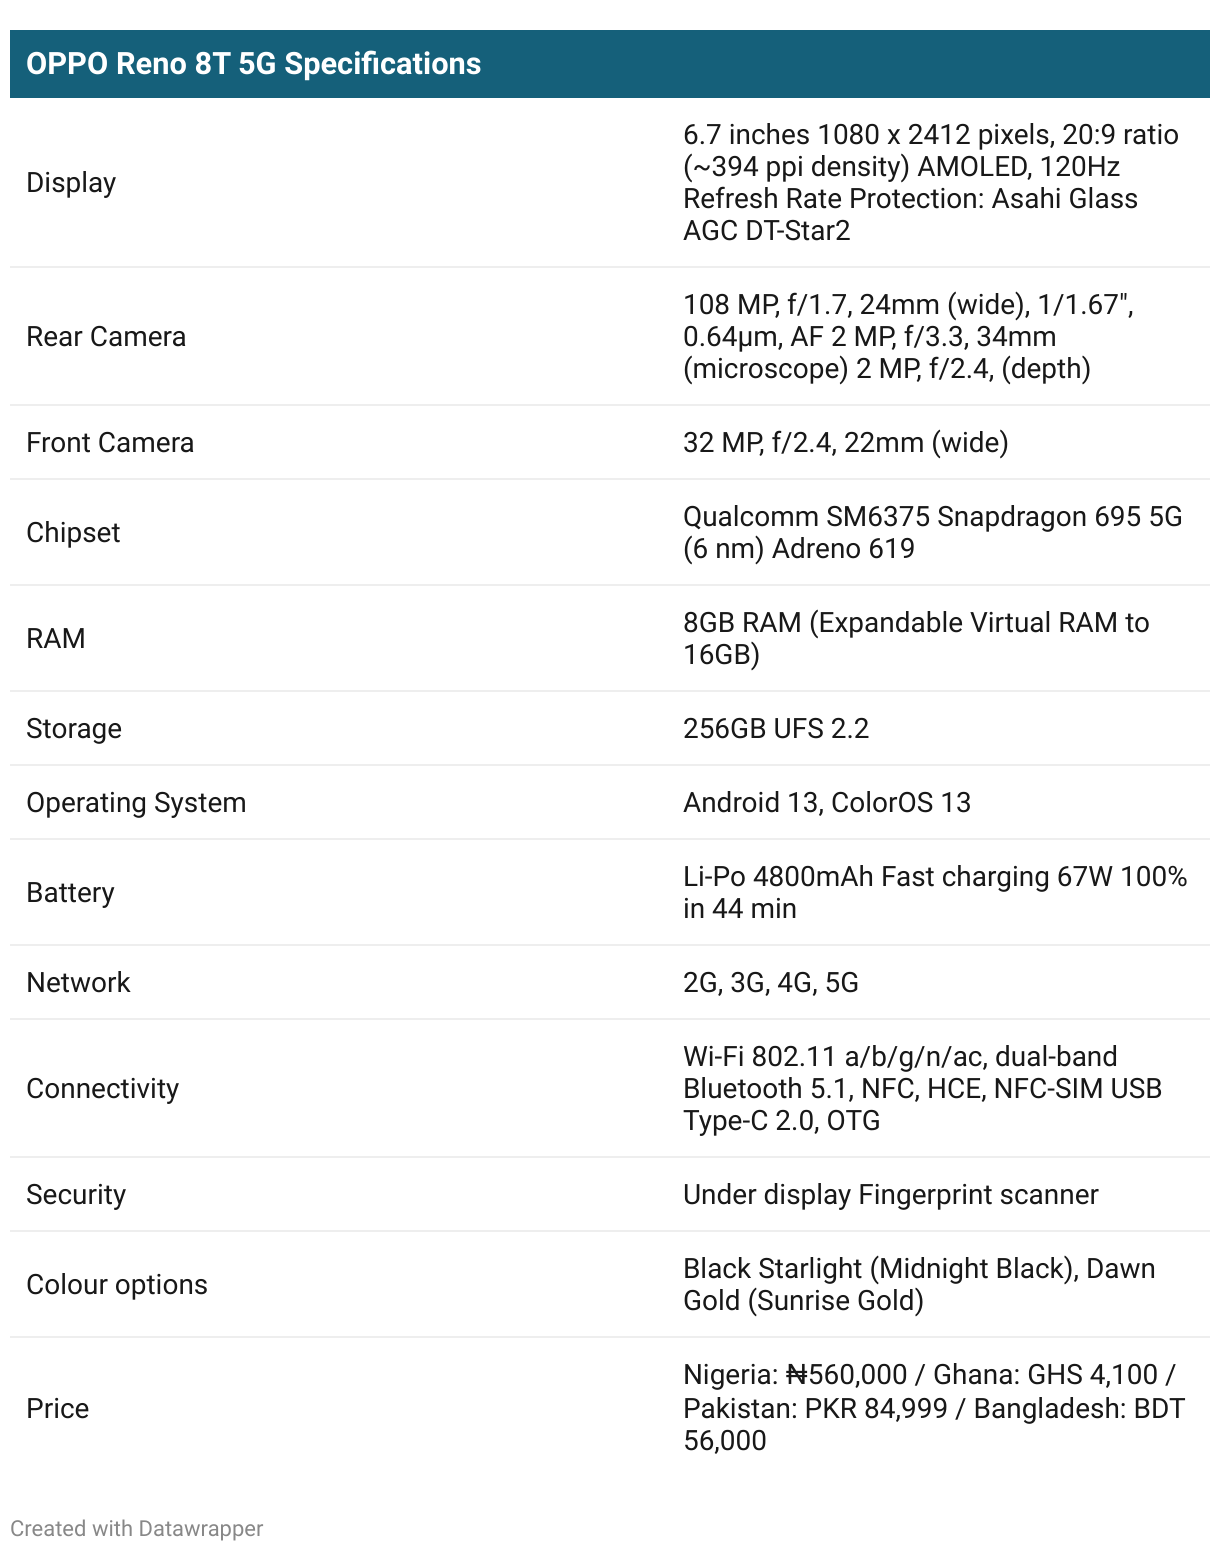 OPPO Reno 8T 5G Specifications Table